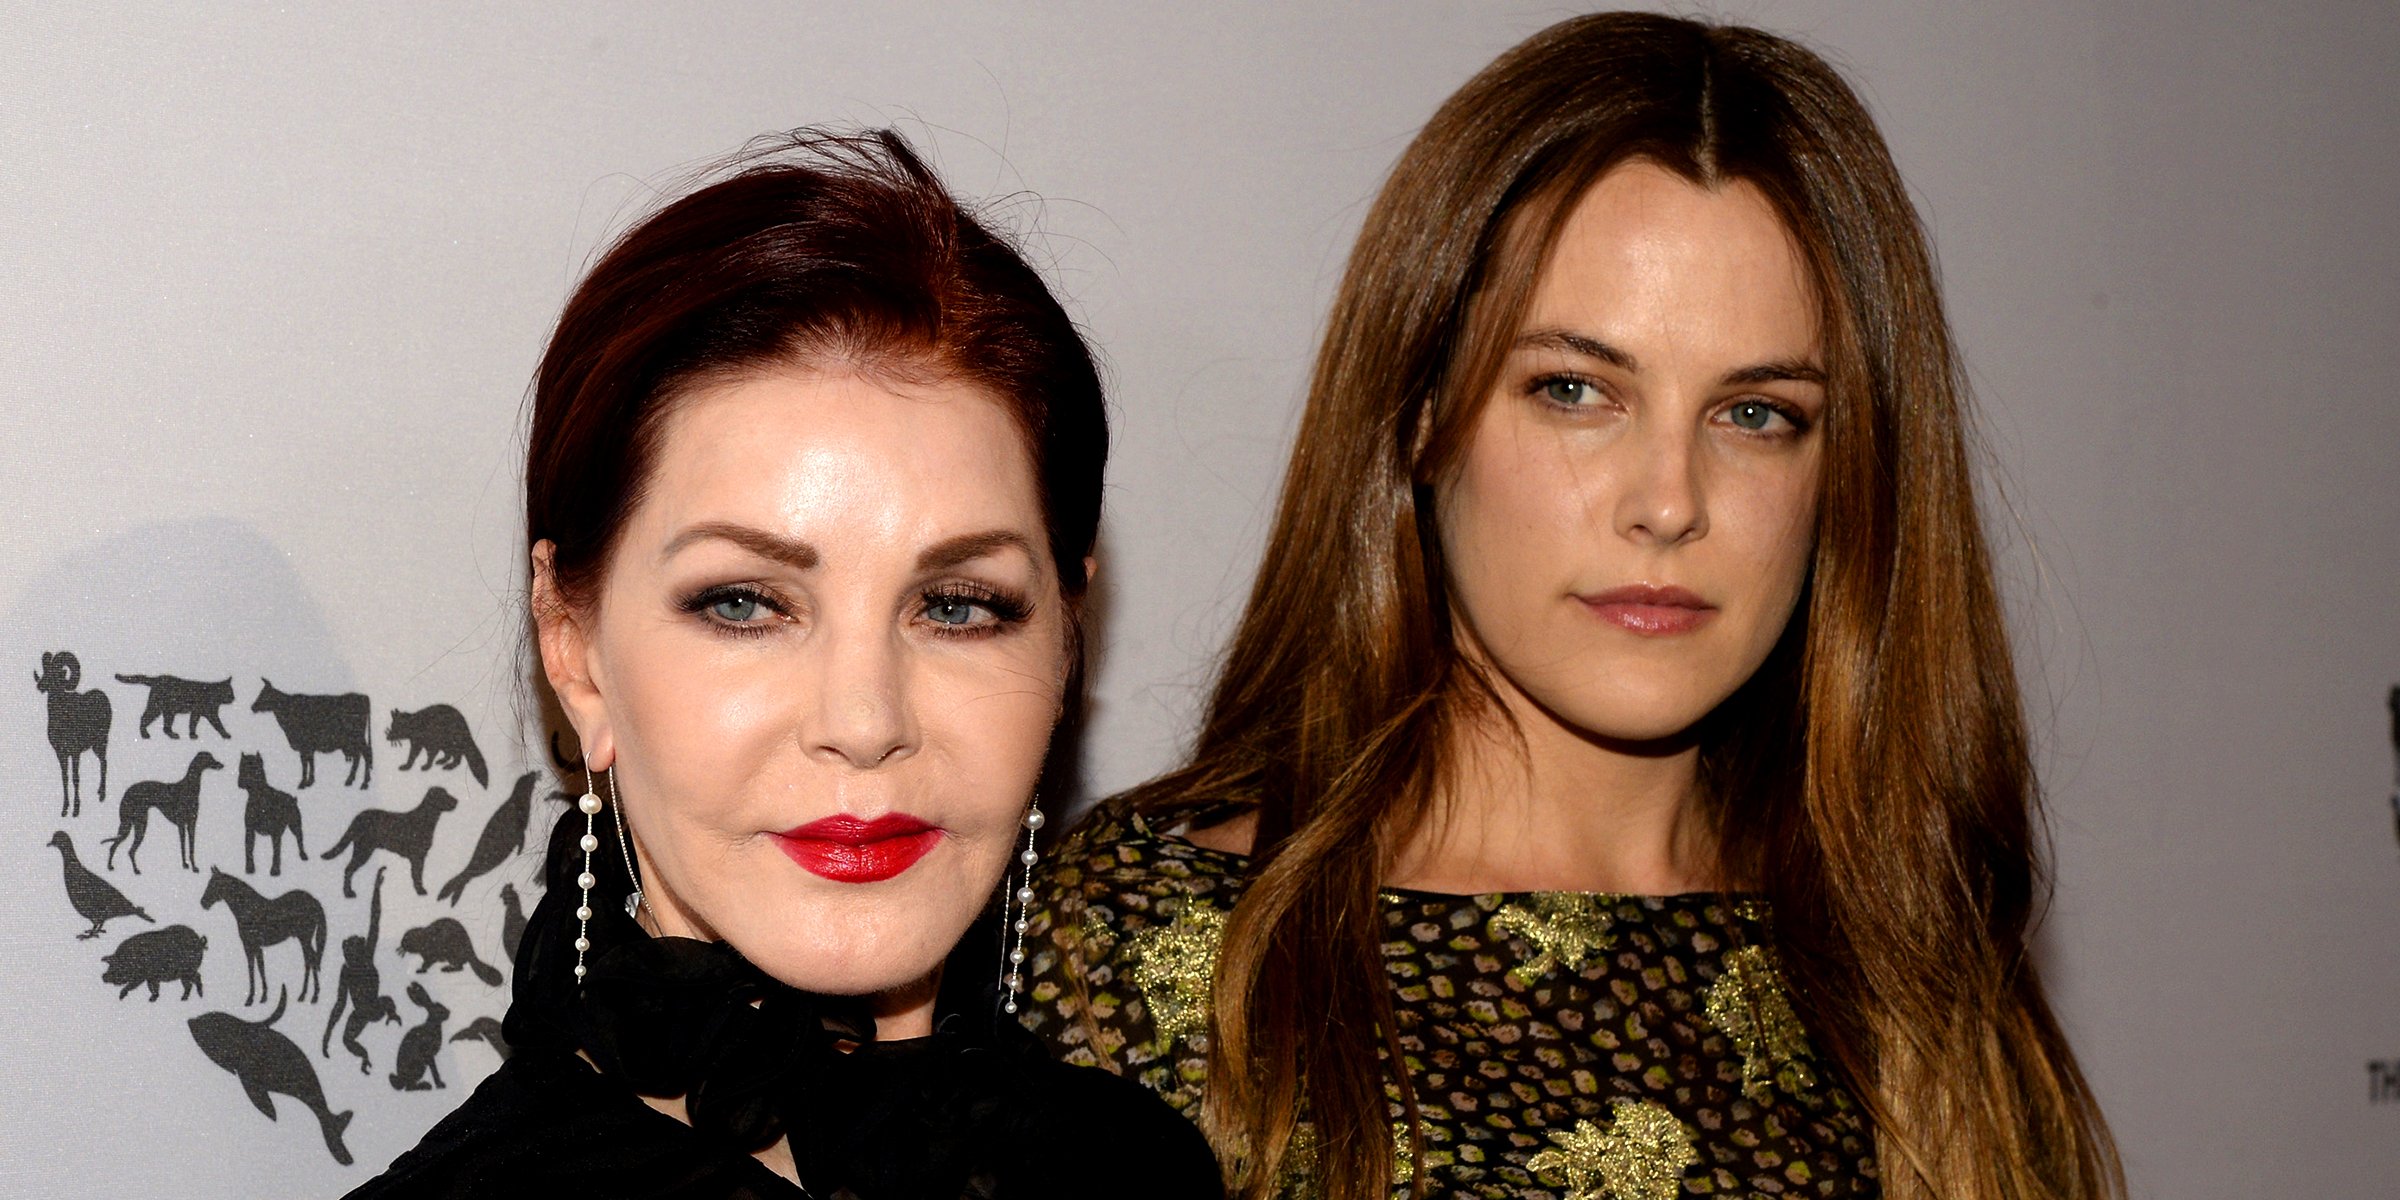 Priscilla Presley and Riley Keough | Source: Getty Images